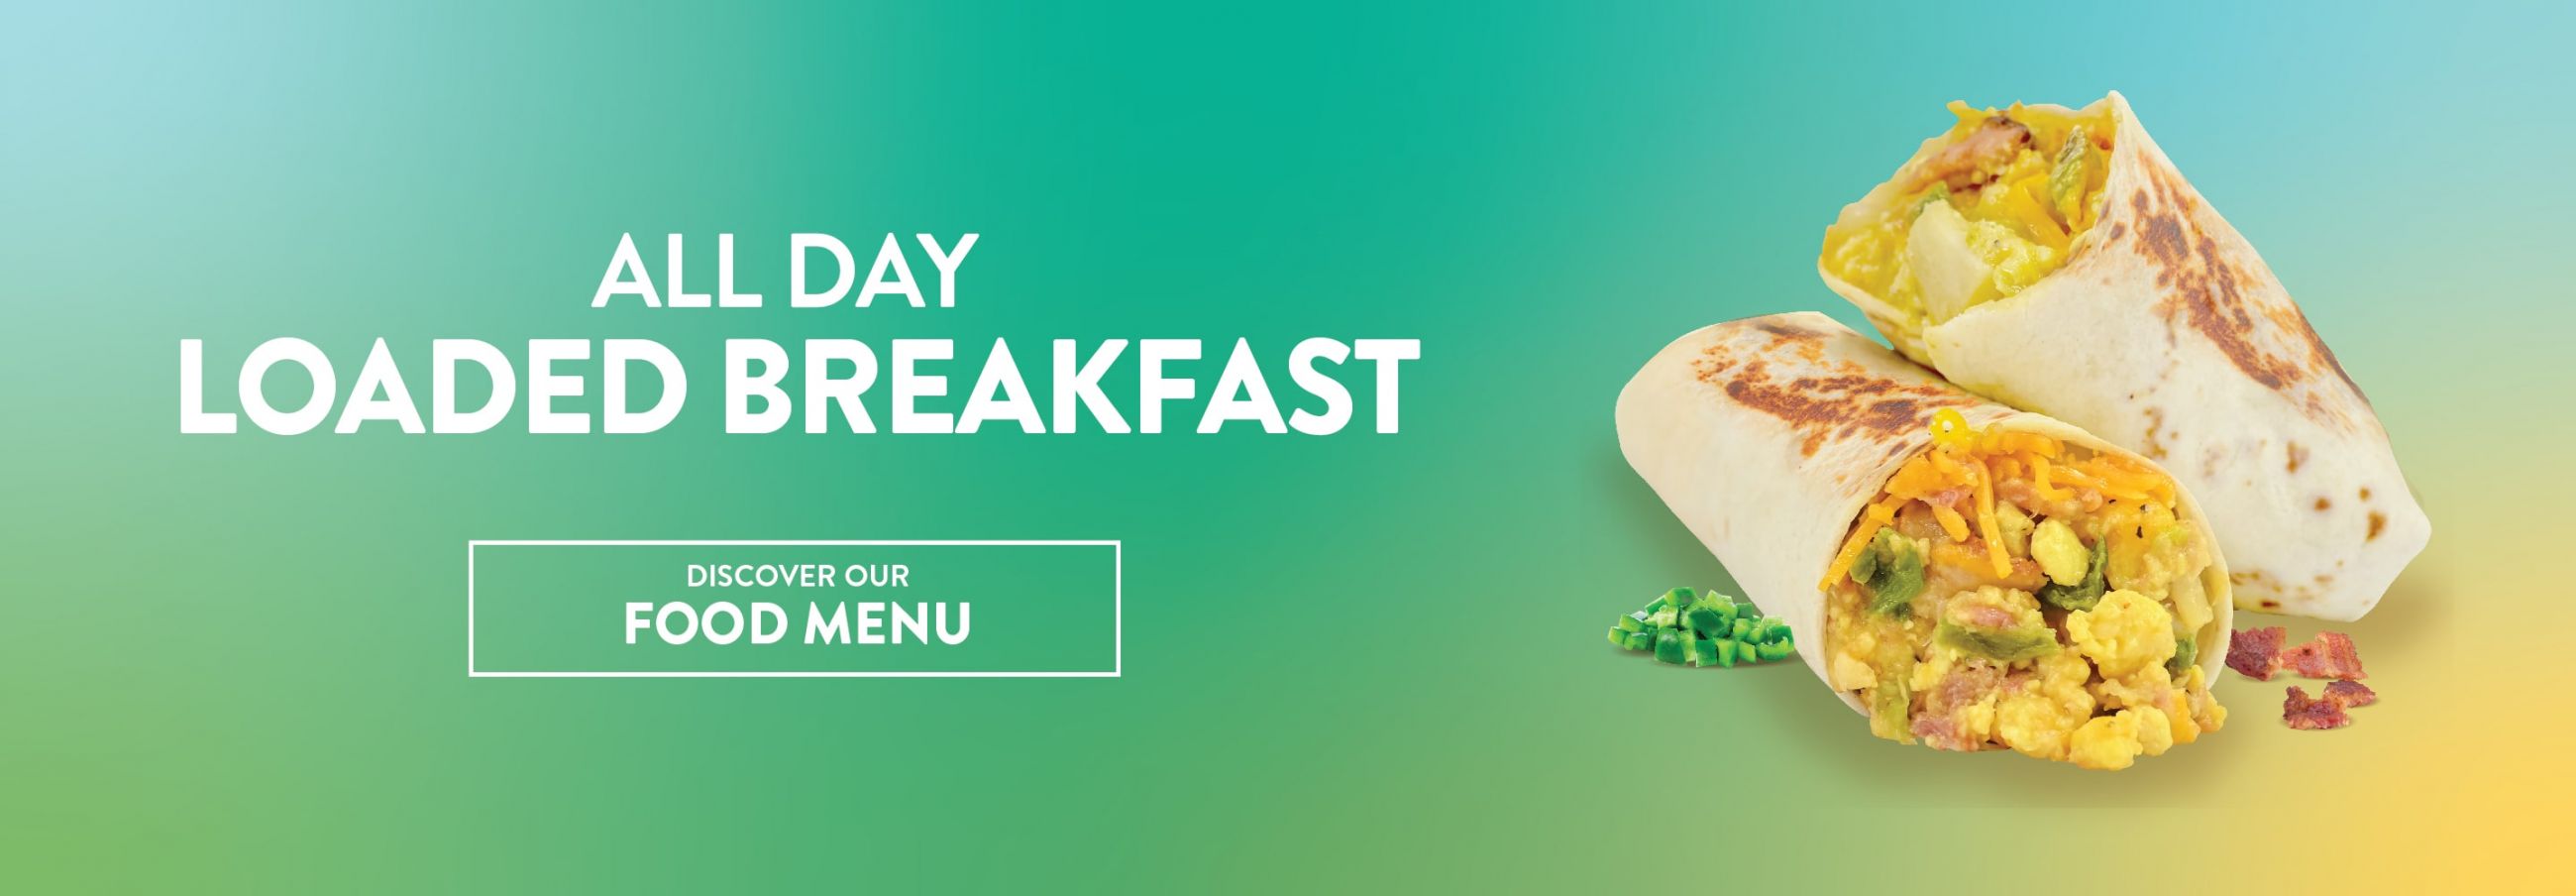 All day loaded breakfast burrito. Click to discover our food menu.